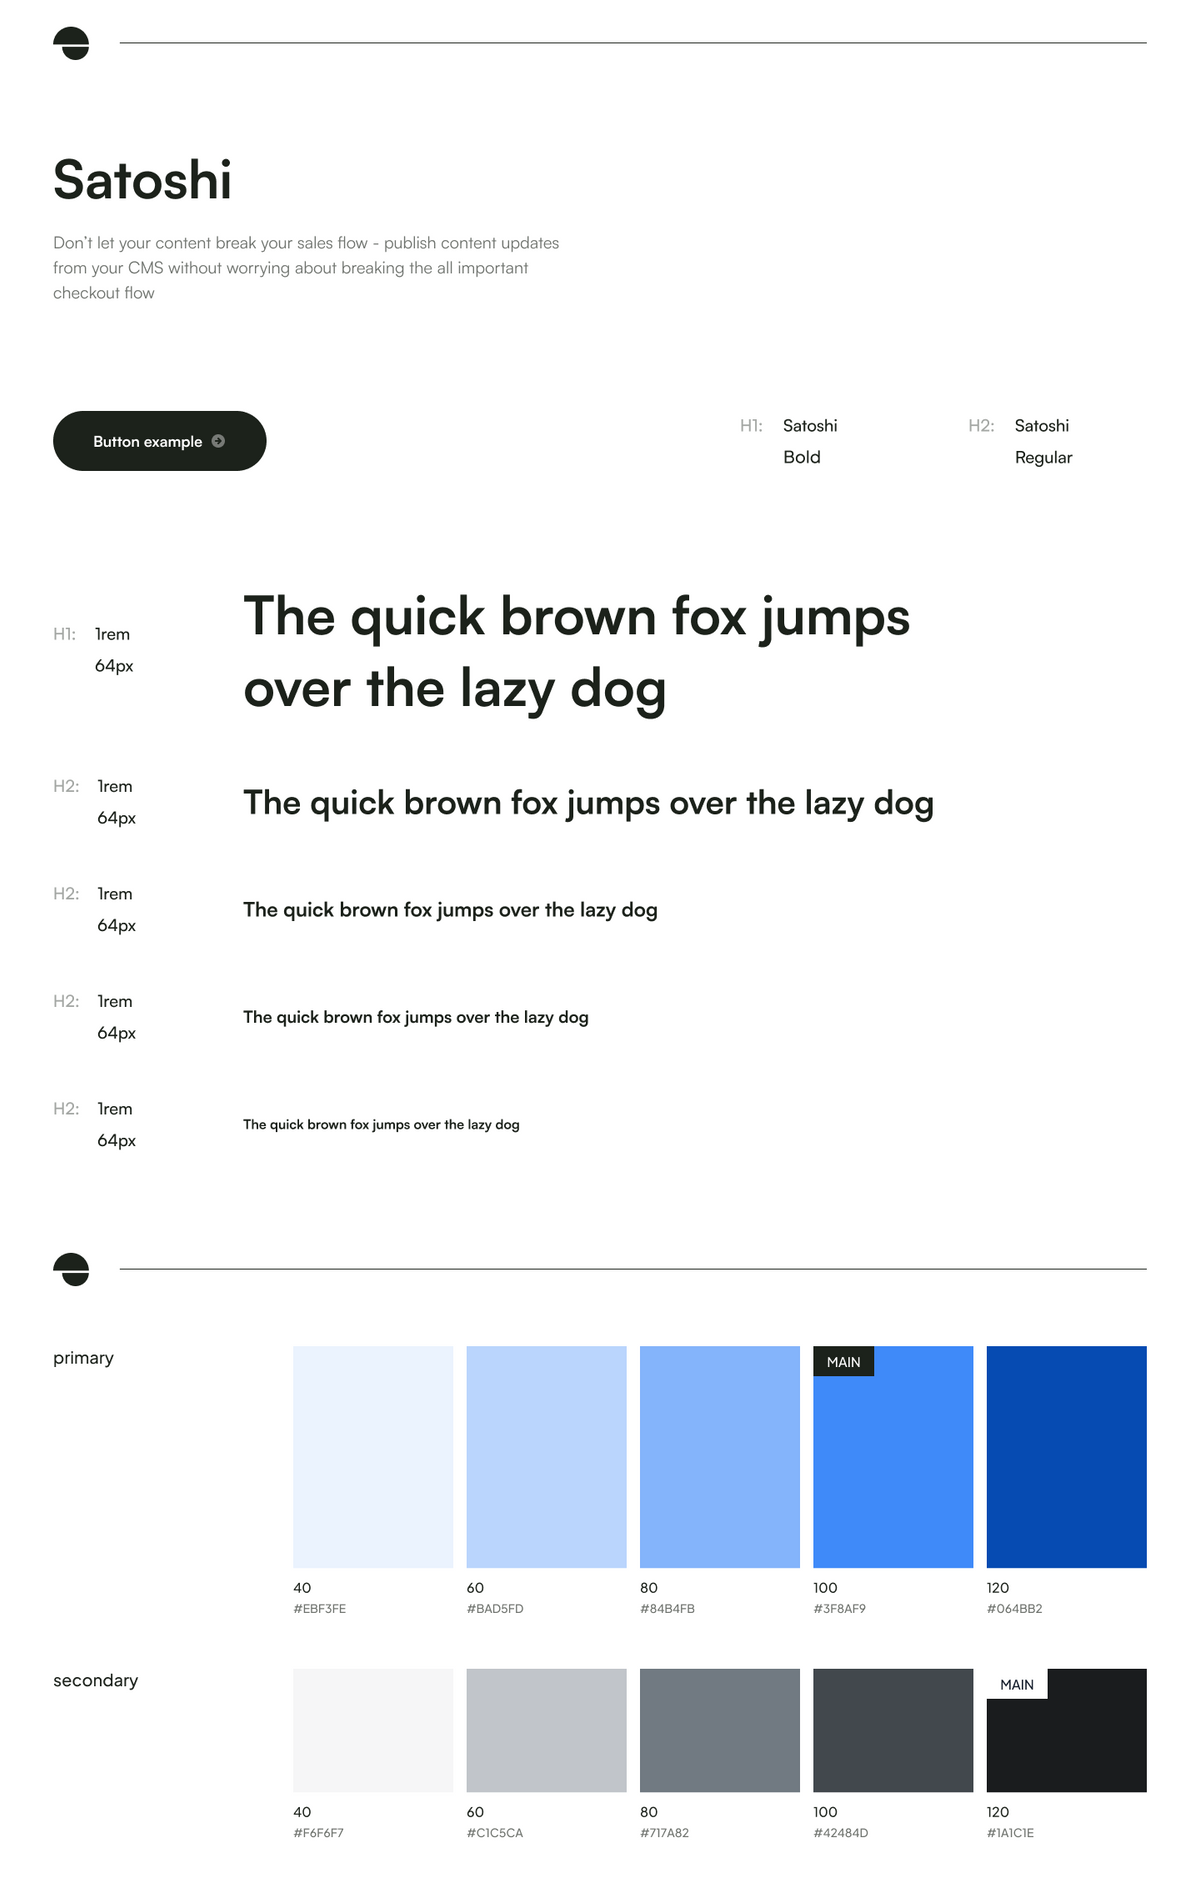 Fragments of Dodonut's design system with fonts and colors.